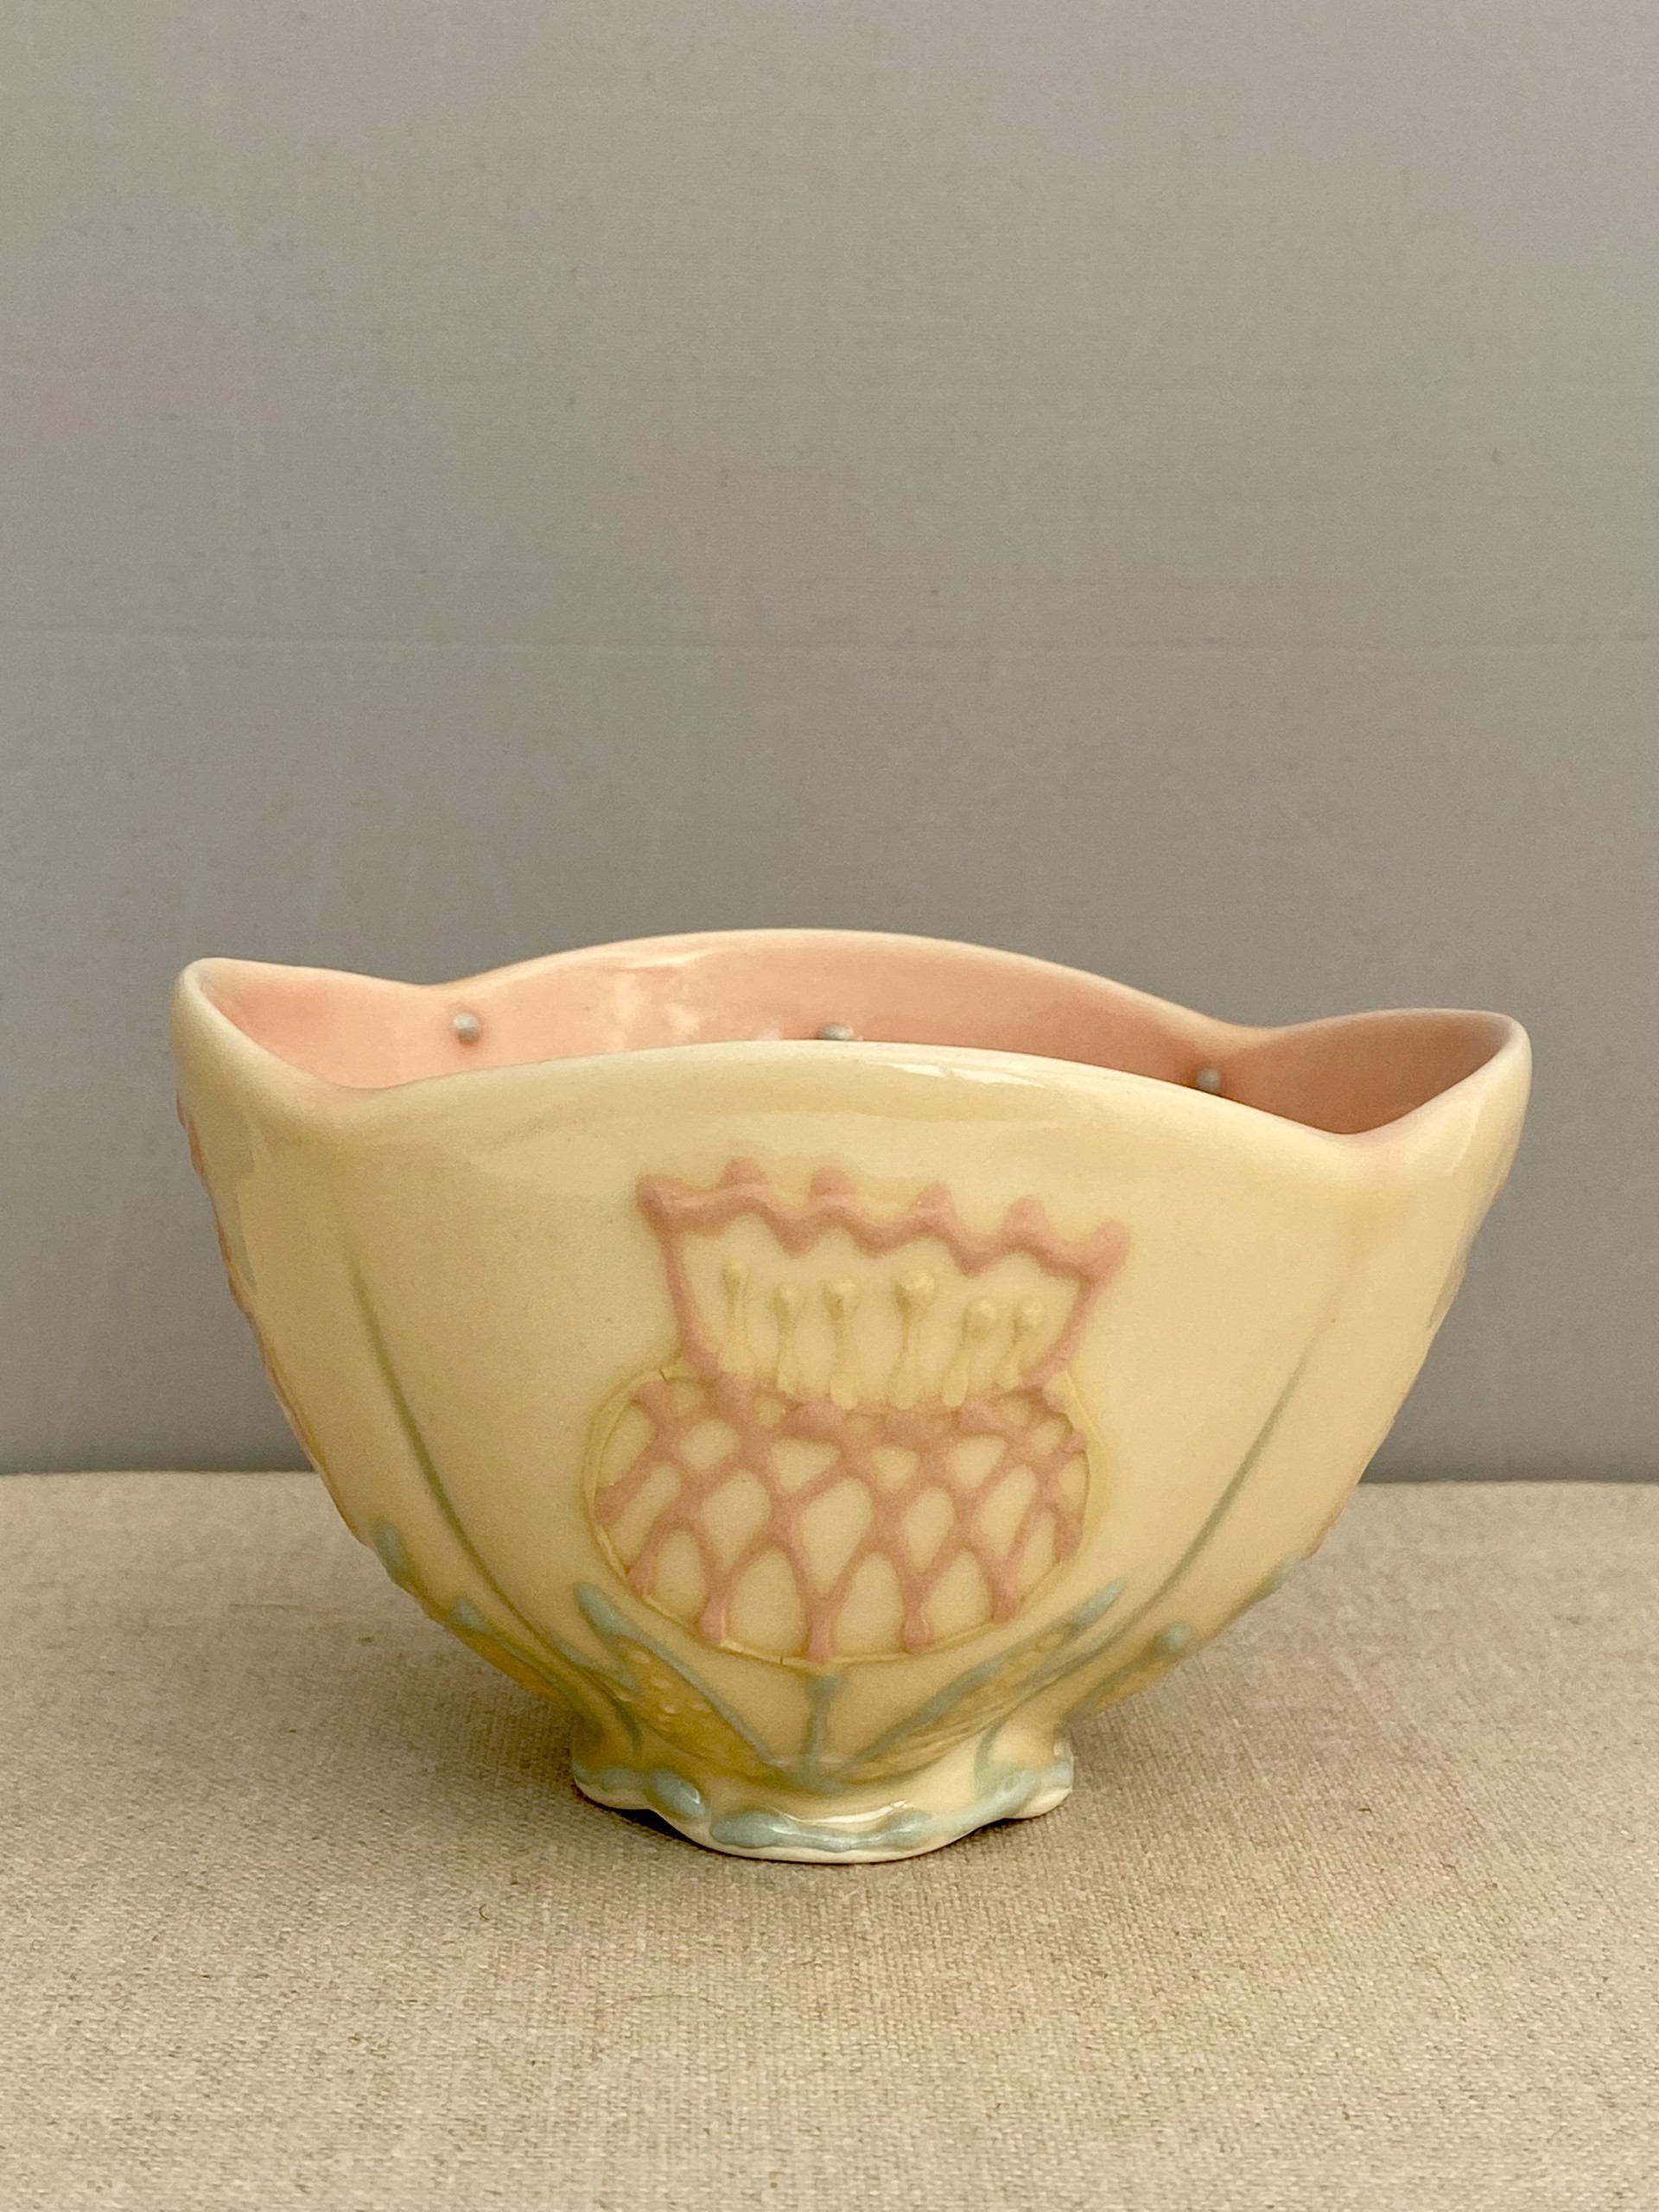 Sweets Bowl #2 by Jenni Brant